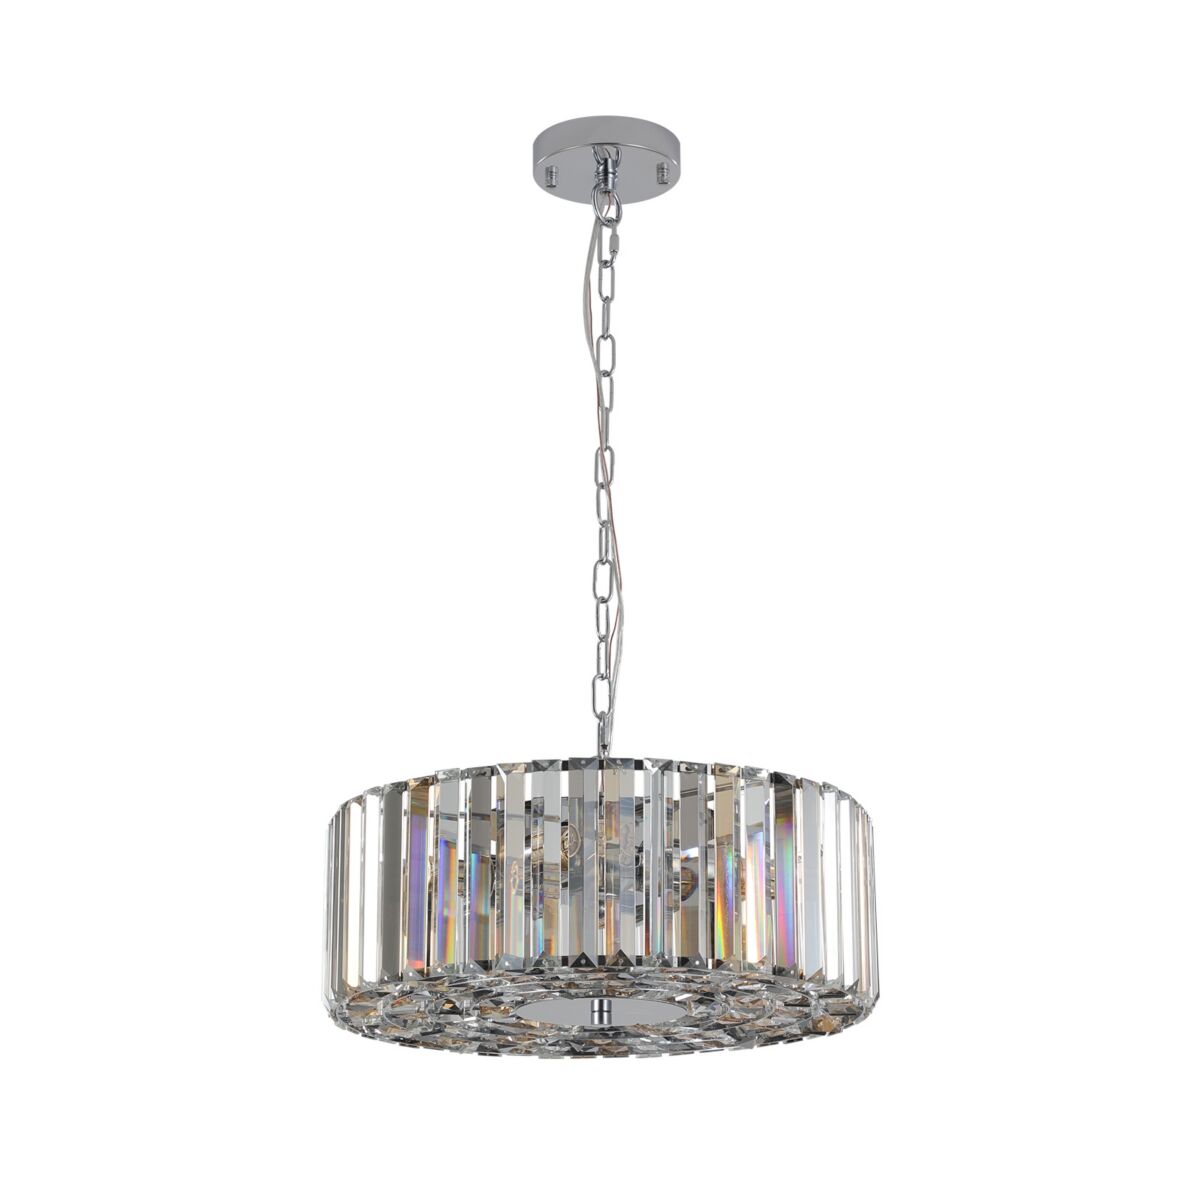 Simplie Fun Modern Crystal Chandelier for Living-Room Round Cristal Lamp Luxury Home Decor Light Fixture - Silver